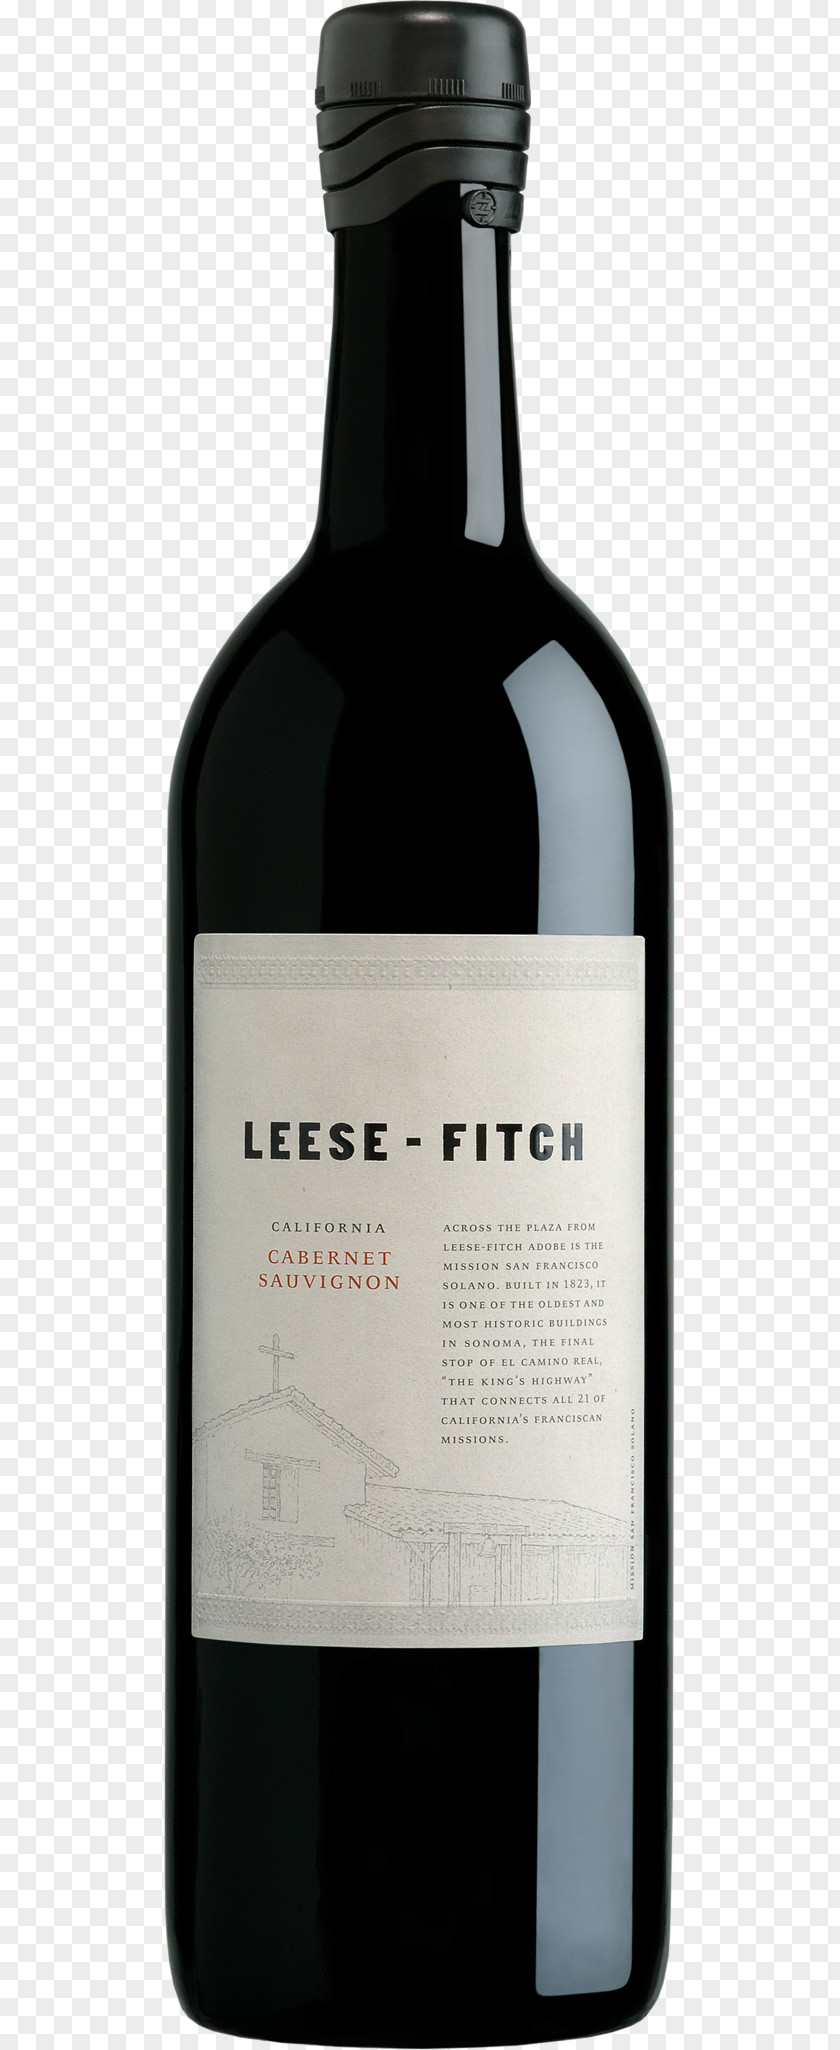 Bottle Image, Free Download Image Of Red Wine Pinot Noir Cabernet Sauvignon Los Carneros AVA PNG